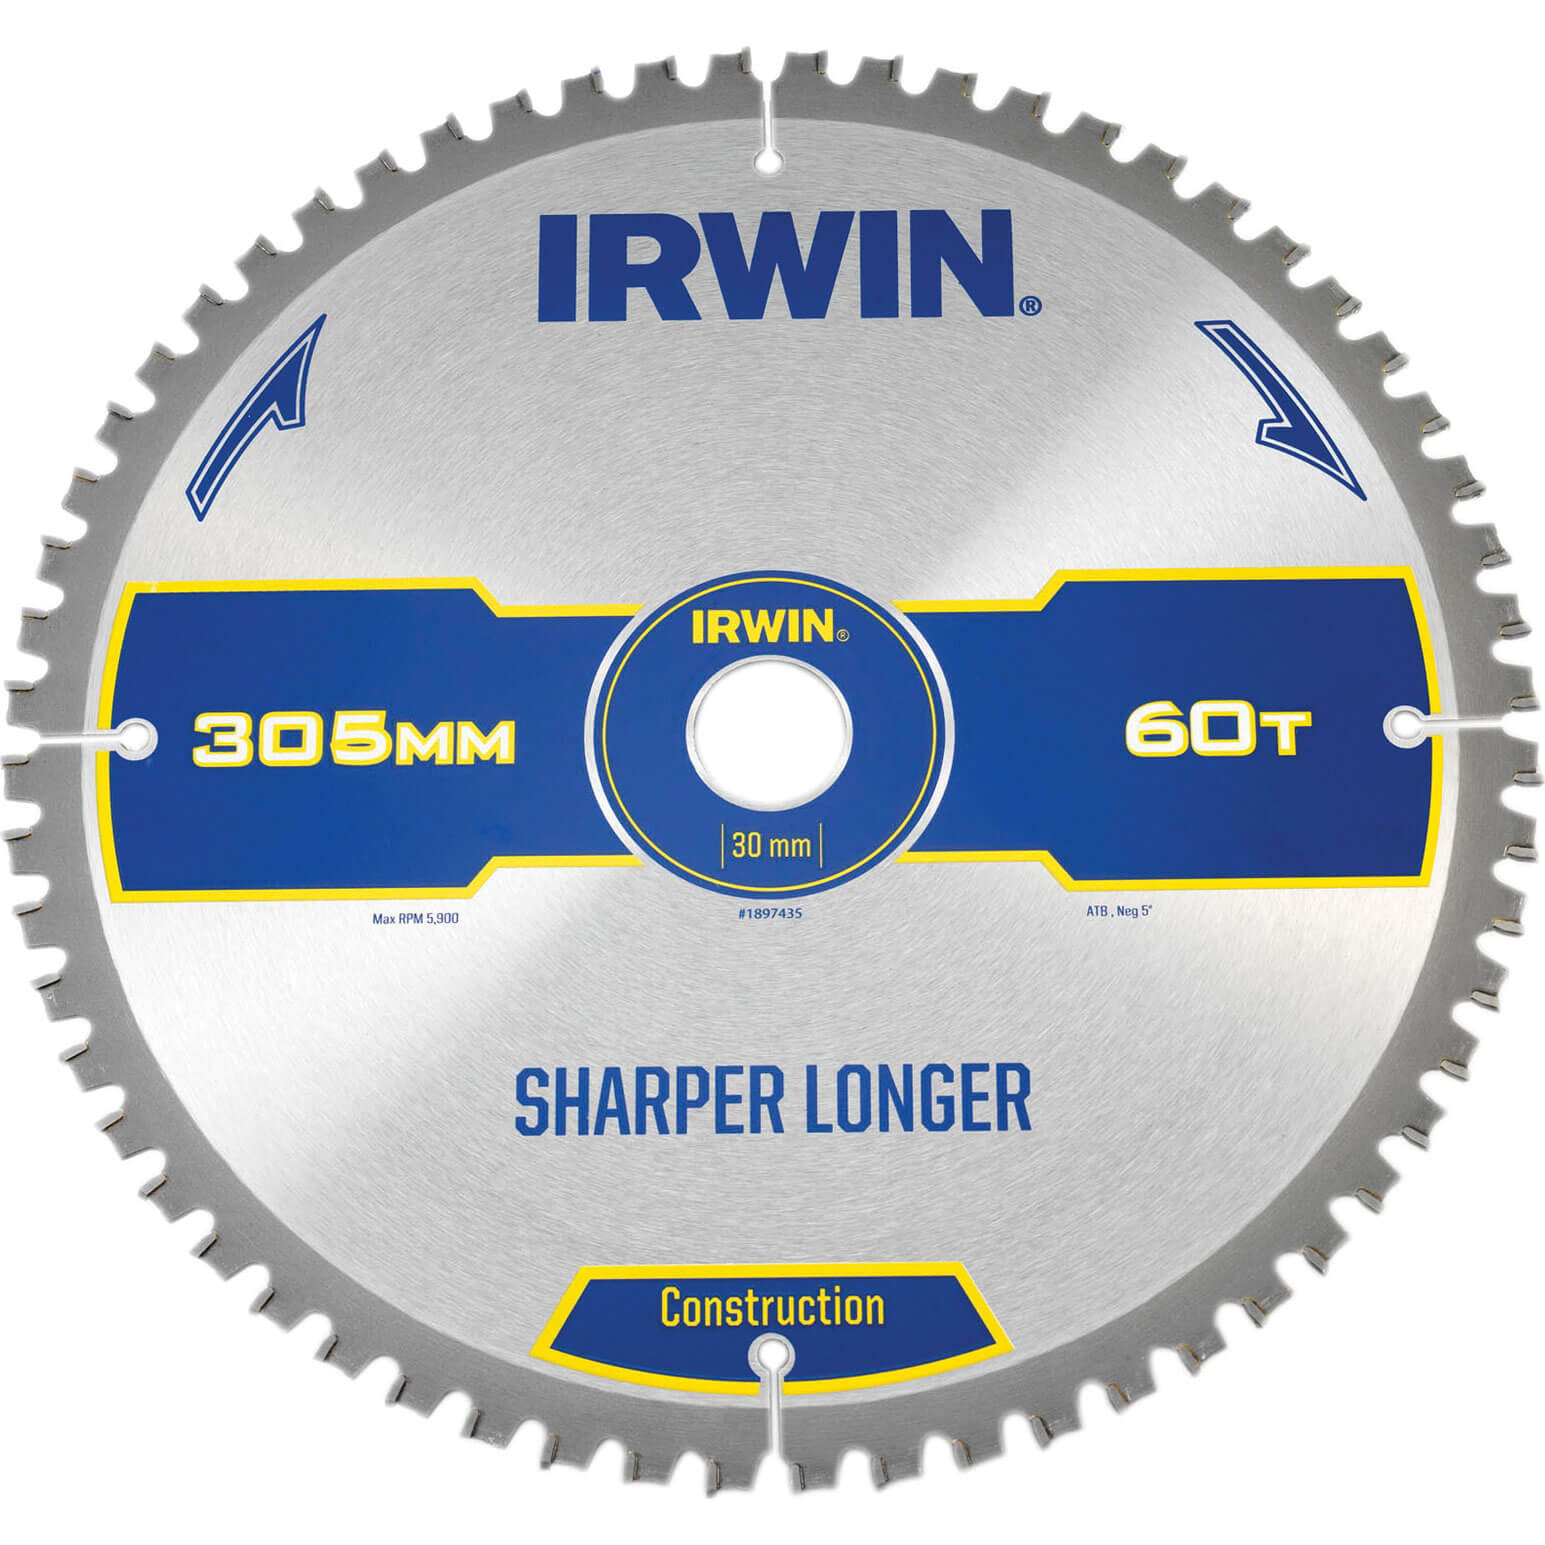 Image of Irwin ATB Ultra Construction Circular Saw Blade 305mm 60T 30mm